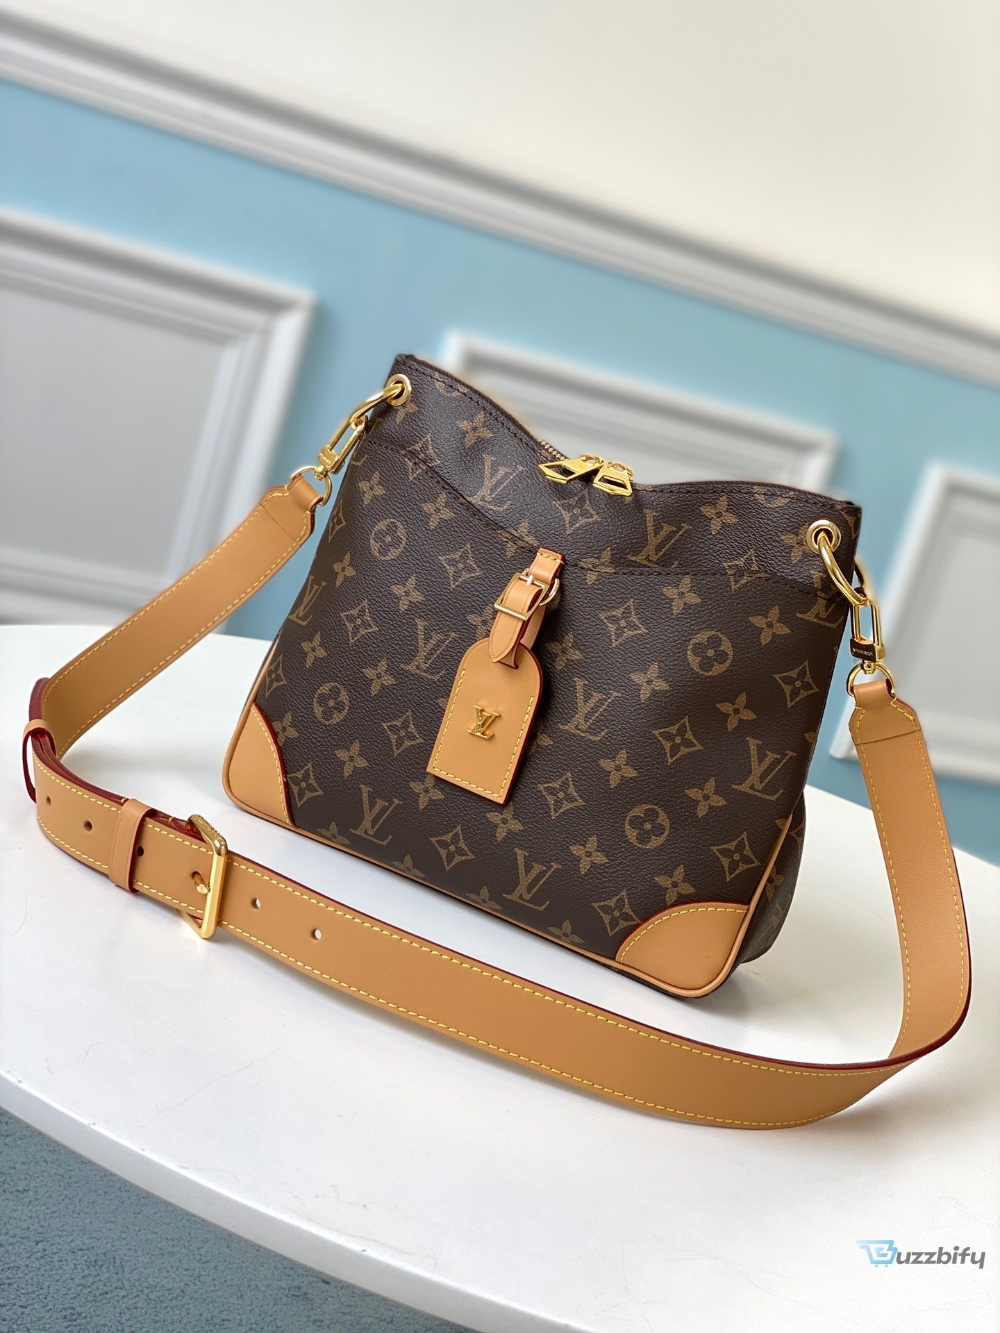 louis vuitton odeon pm monogram canvas natural for fallwinter womens handbags shoulder and crossbody bags 11in28cm lv m45354 2799 buzzbify 1 27